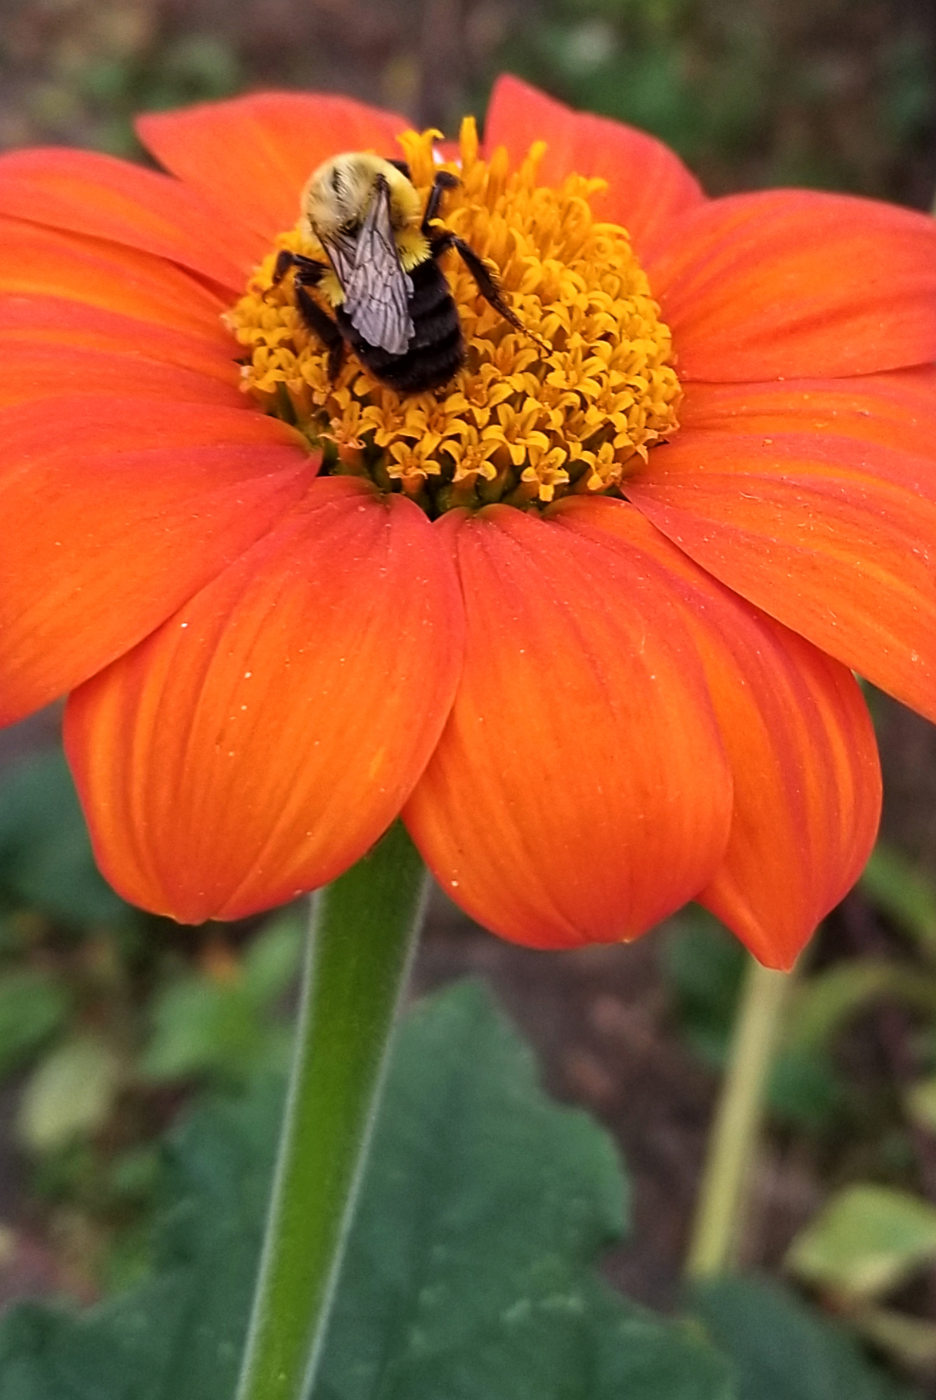 fat black and yellow bumblebee with whitish wings crawling on the yellow stamen of a bright orange flower bloom